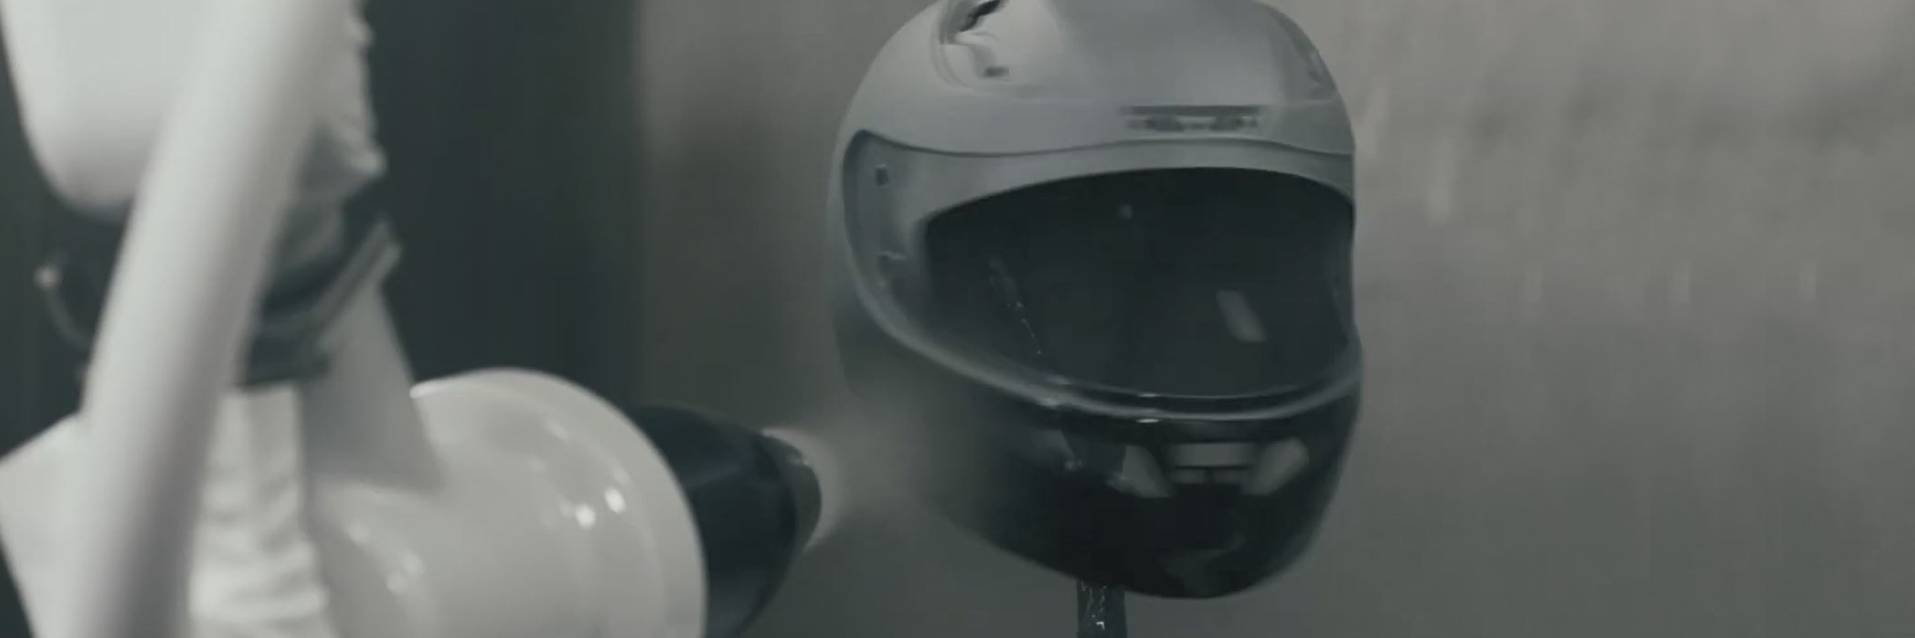 HJC uses ready2spray robot to paint motorcycle helmets